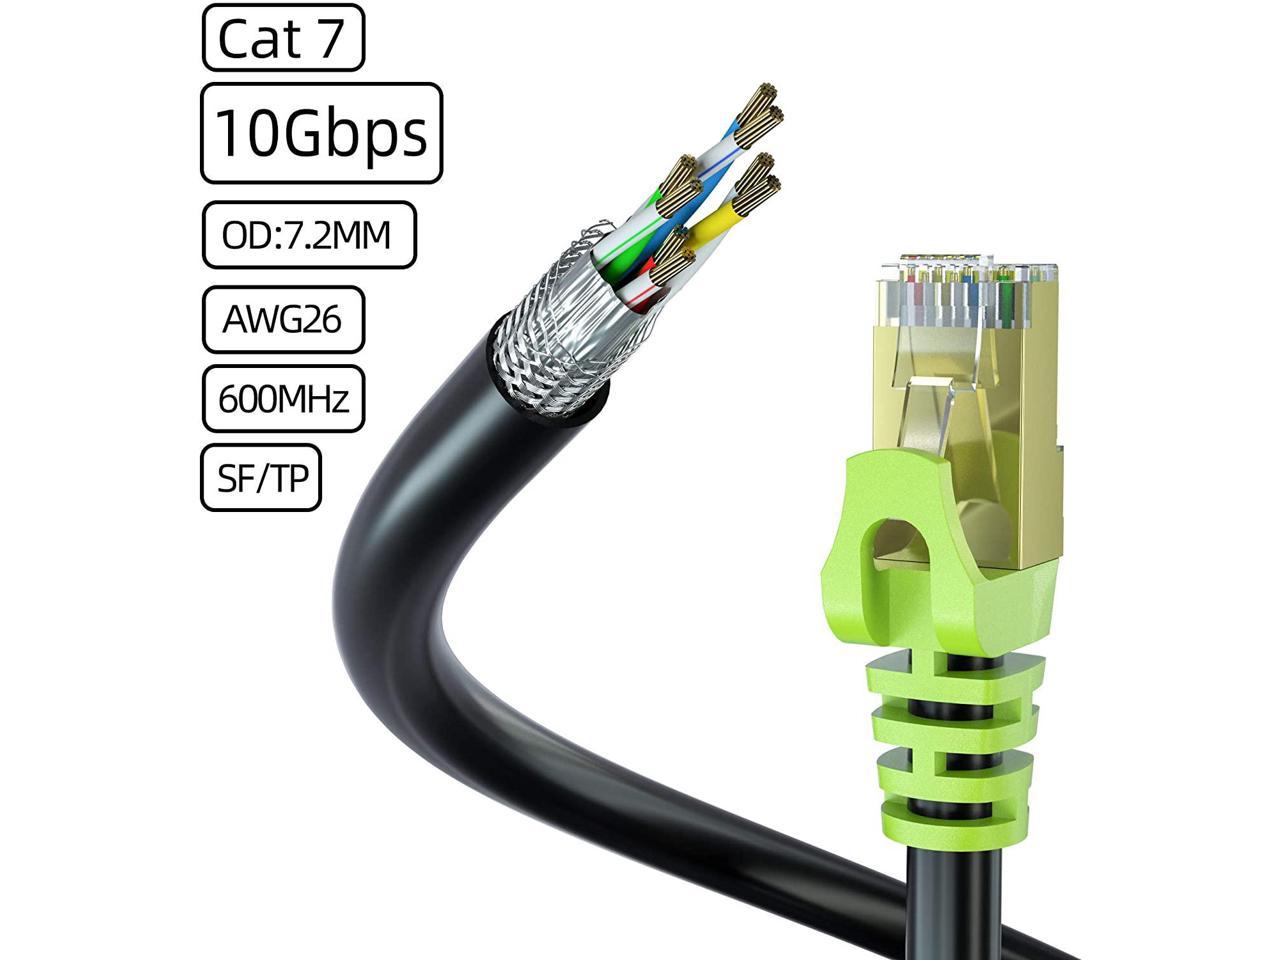 Outdoor Cat 7 Ethernet Cable 300ft 26AWG Heavy-Duty Cat7 Networking Cord Patch Cable RJ45 Transmission Speed 10GbpsTransmission Bandwidth 600Mhz LAN Wire Cable SFTP Waterproof Direct Burial 